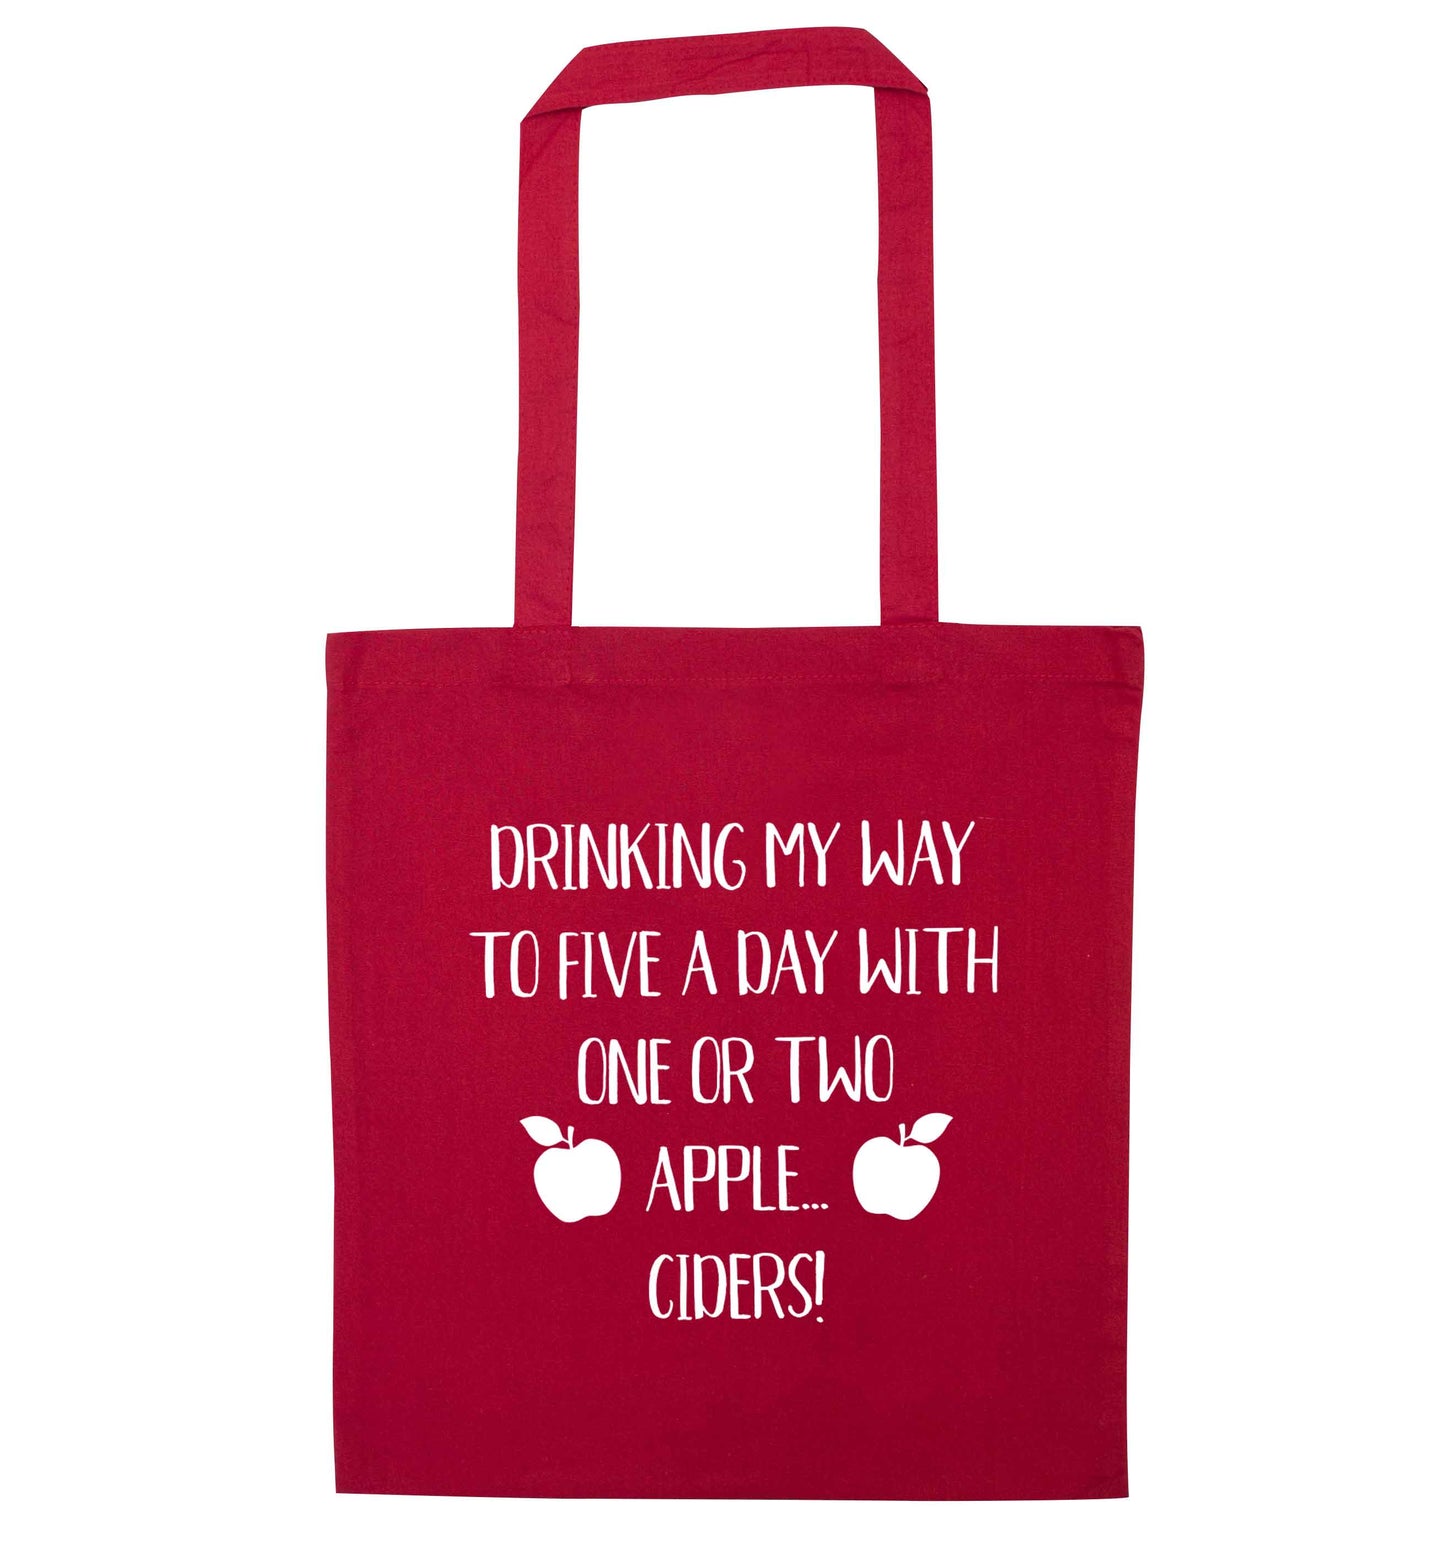 Drinking my way to five a day with one or two apple ciders red tote bag